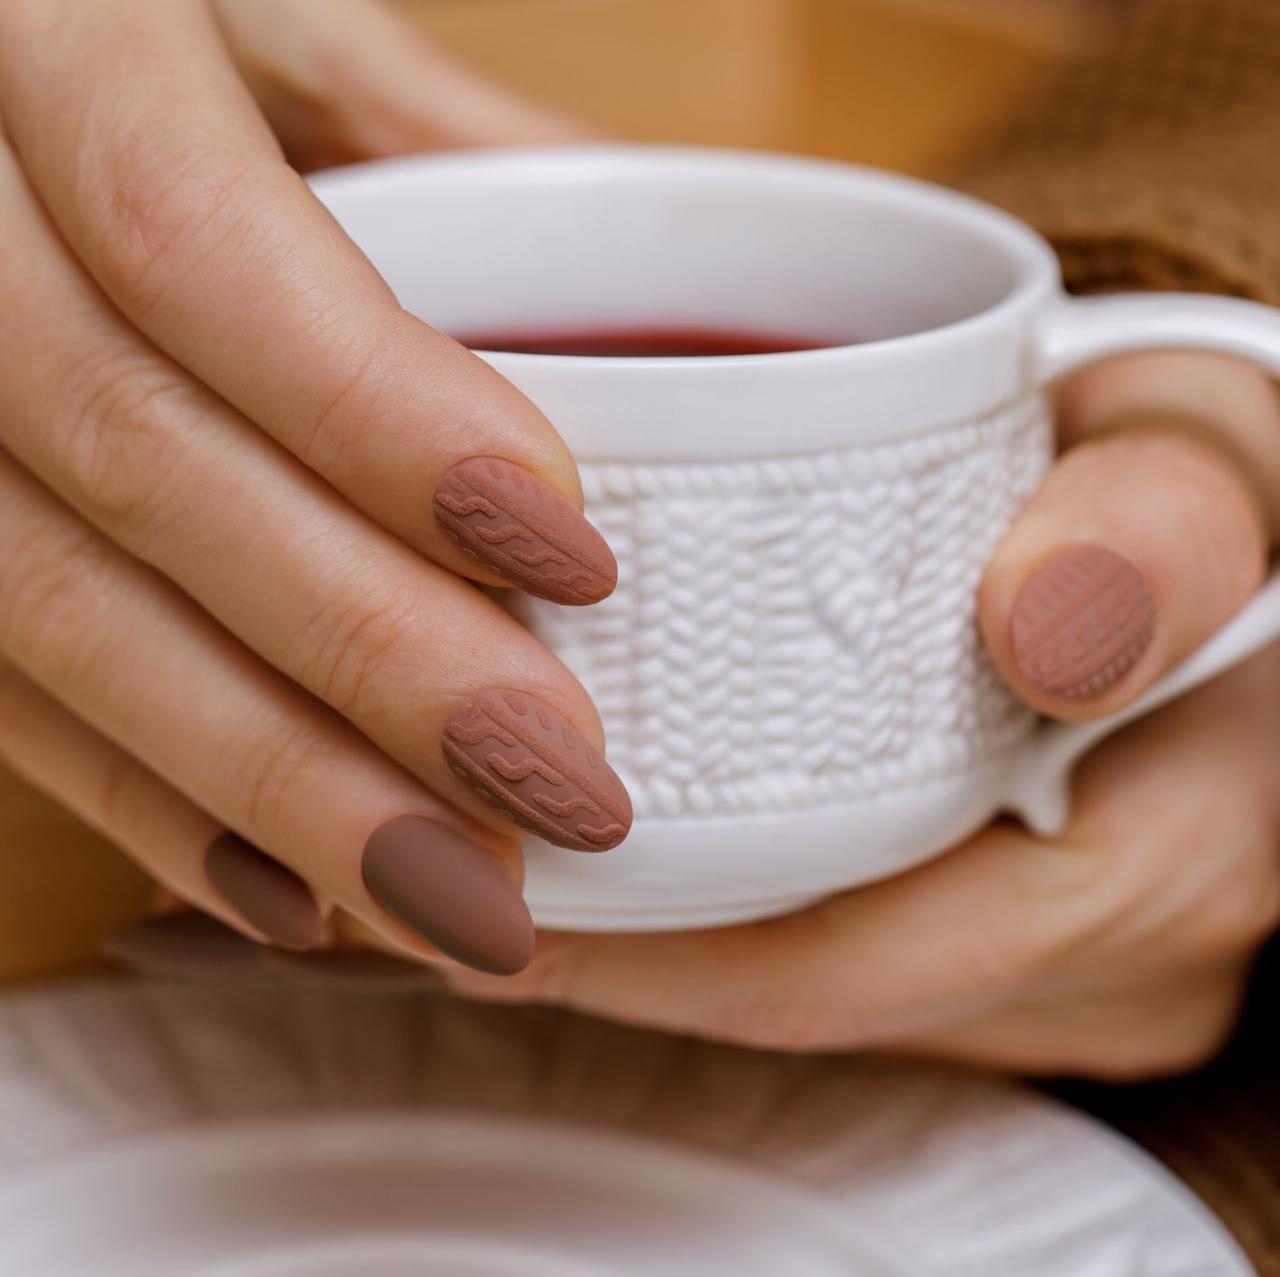 stylish winter nail design knitted fabric texture on women's nails a woman's hand holds a cup of warm drink